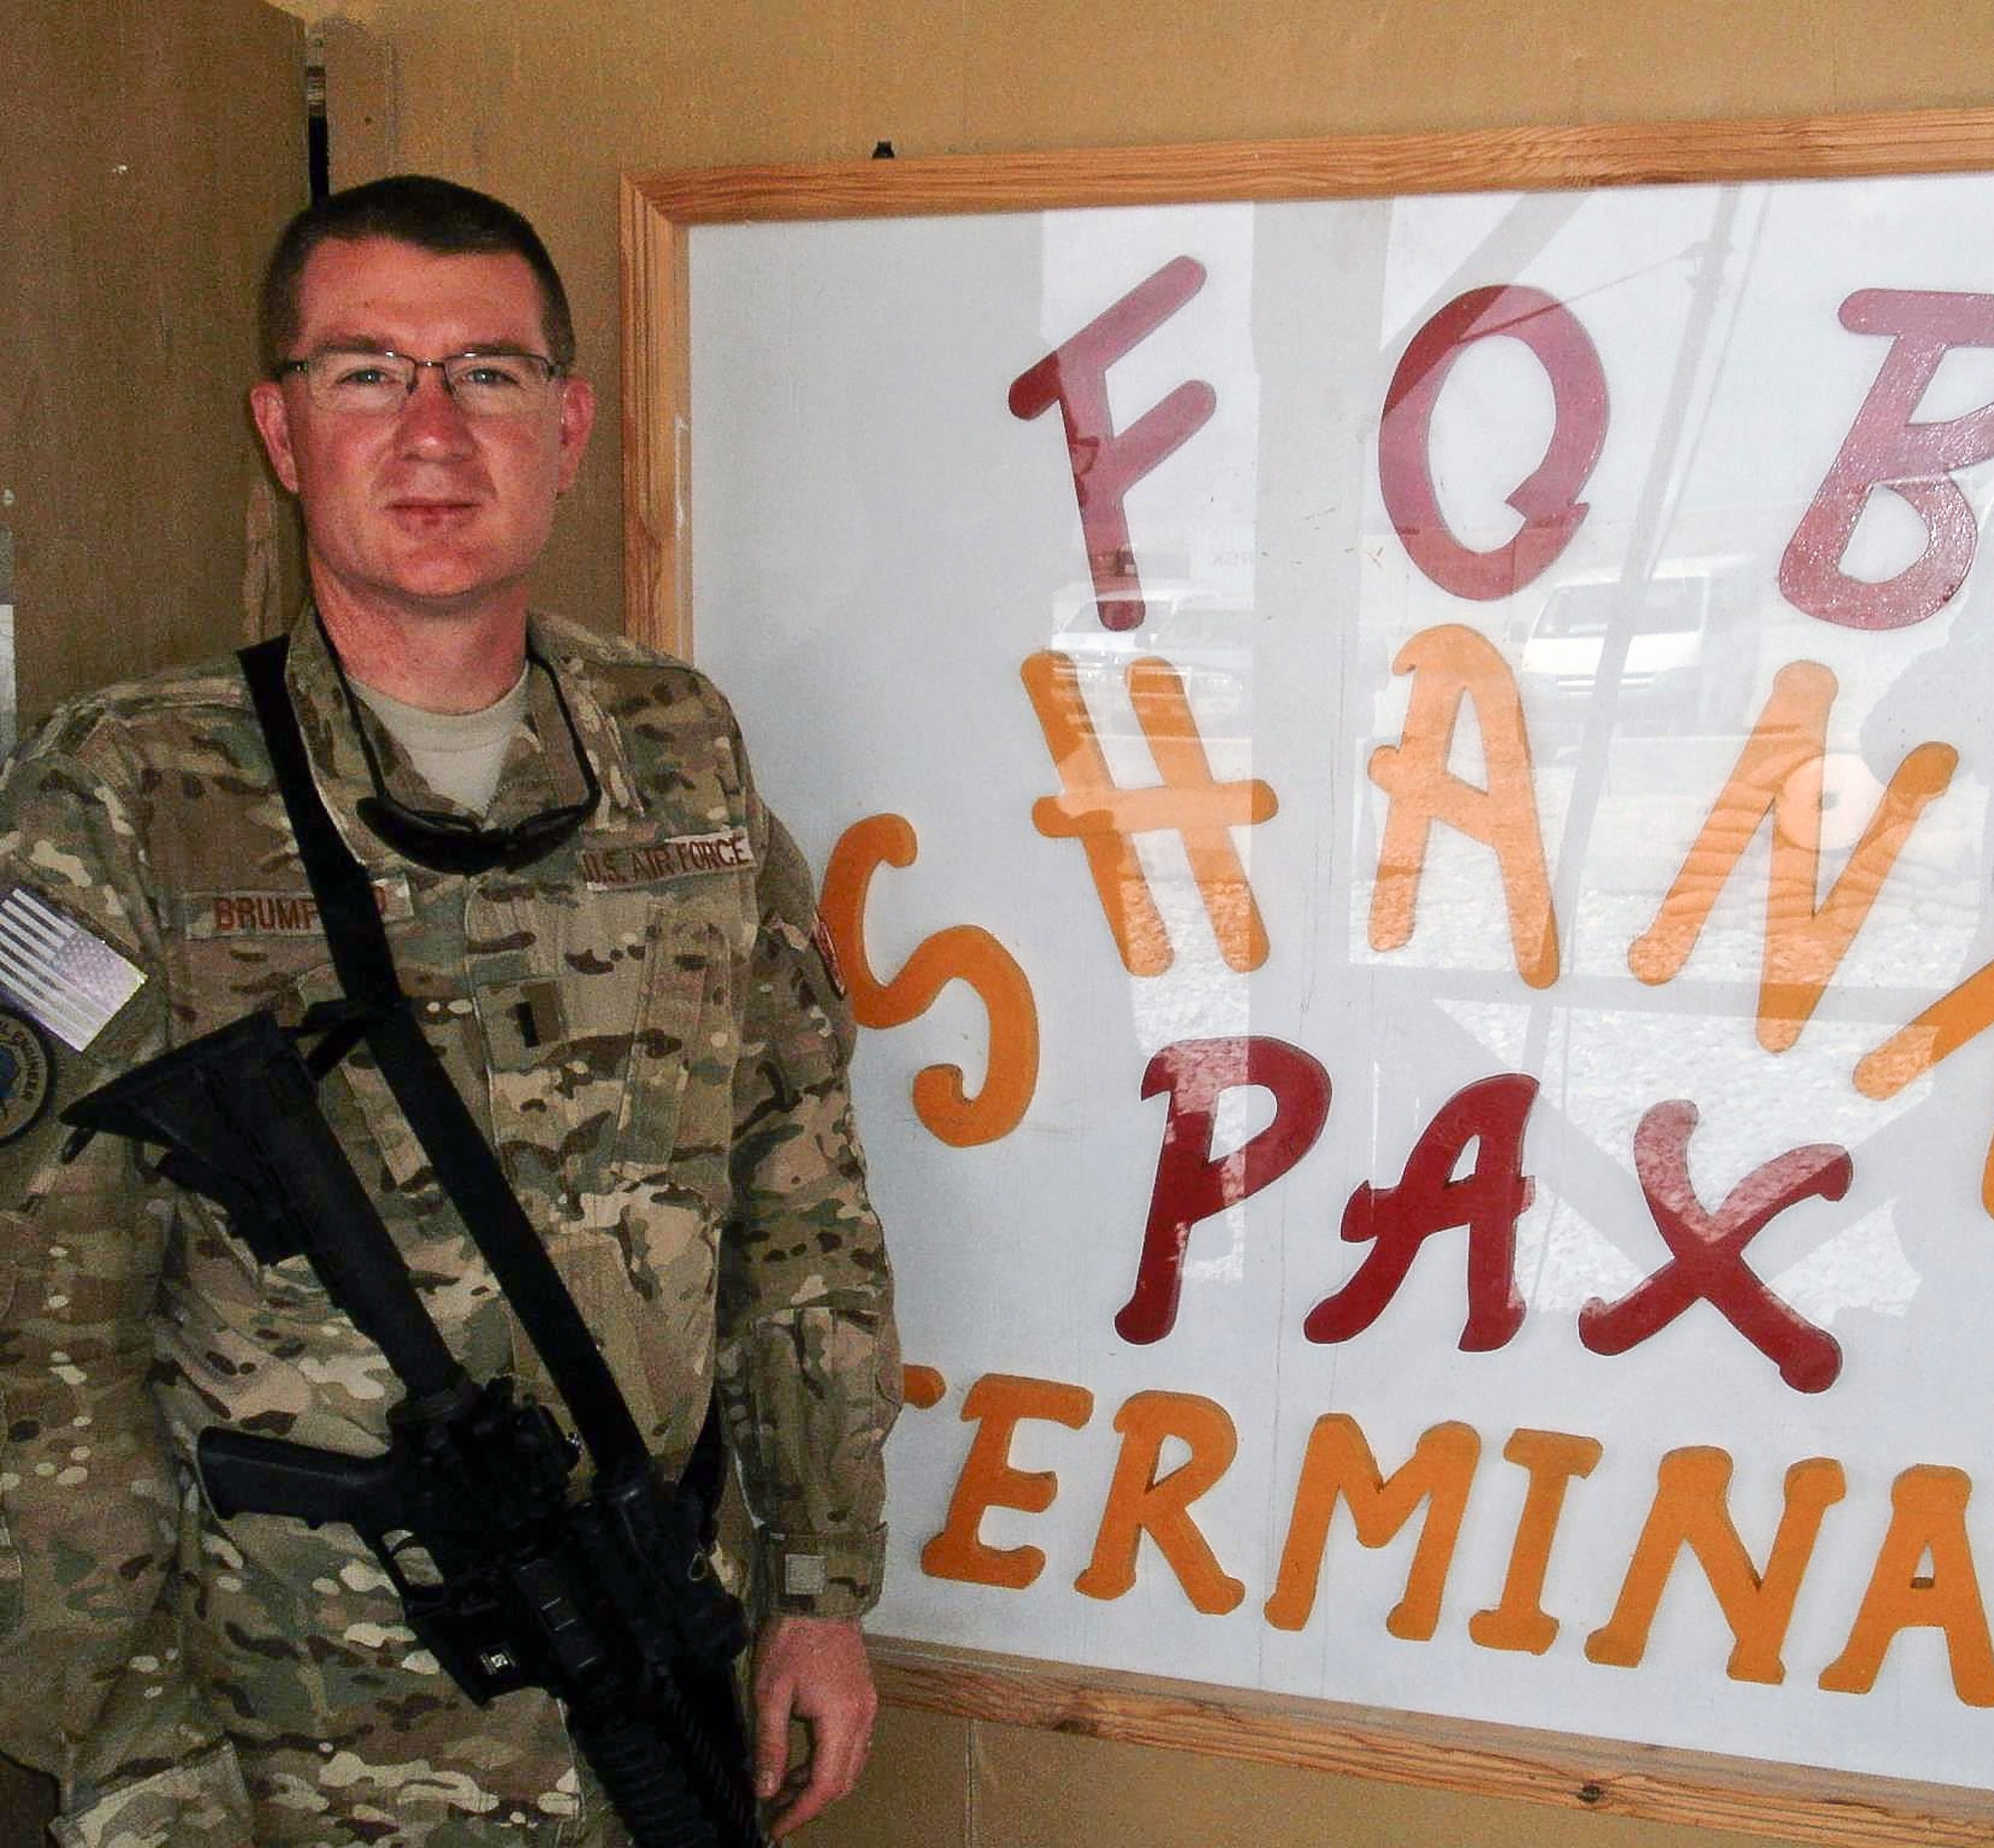 Then 1st Lt. Robert Brumfield, a 116th Air Control Wing operations officer, prepares to enter the passenger terminal at Forward Operating Base Shank en route to a mission in Eastern Afghanistan, July 19, 2012. (Courtesy photo)